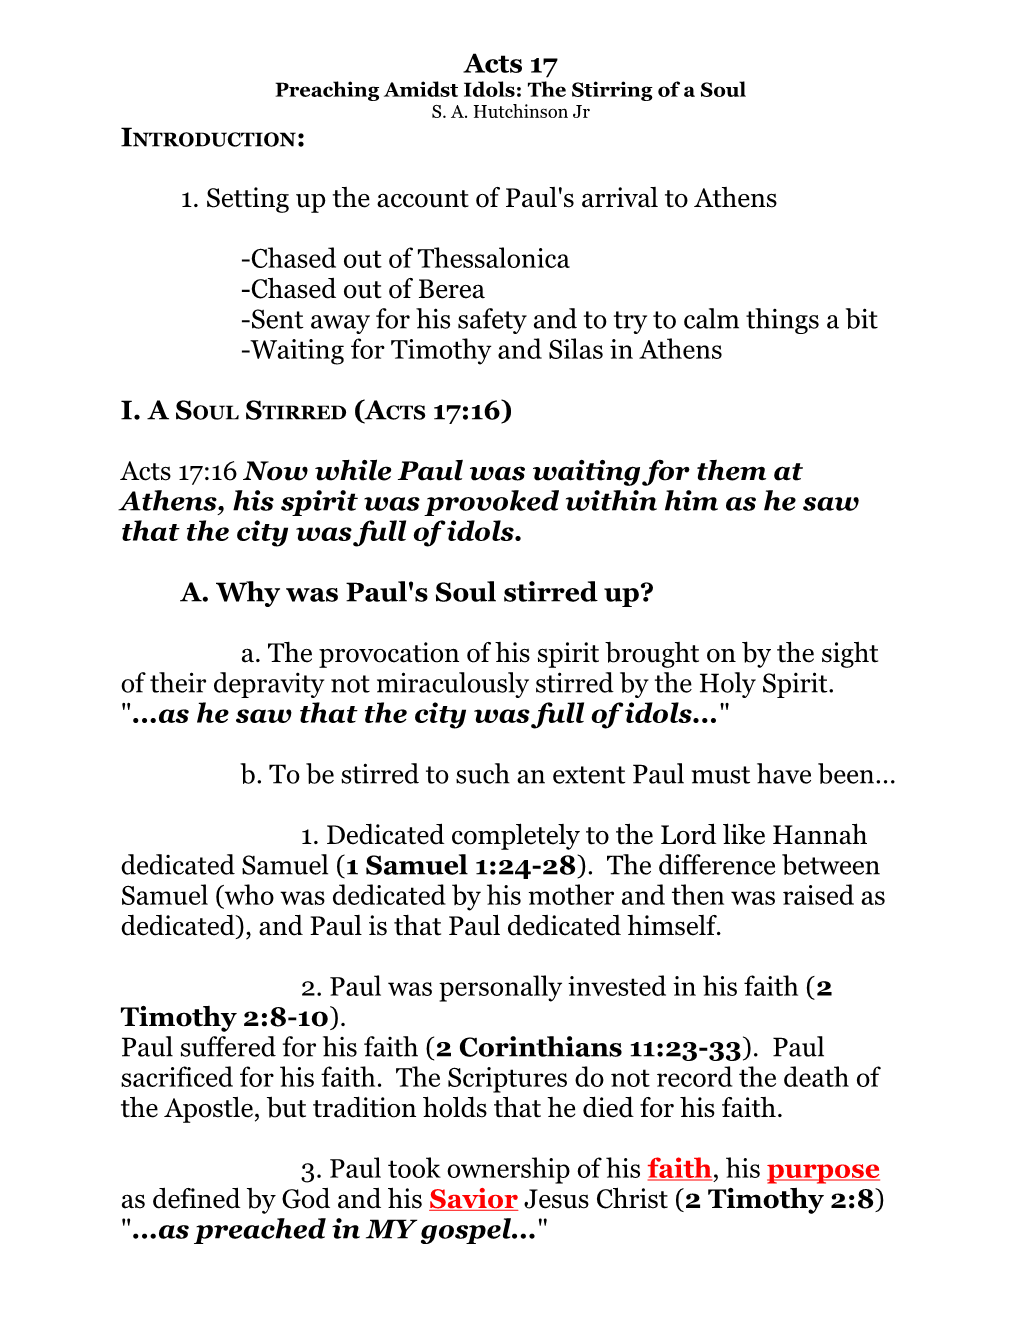 1. Setting up the Account of Paul's Arrival to Athens